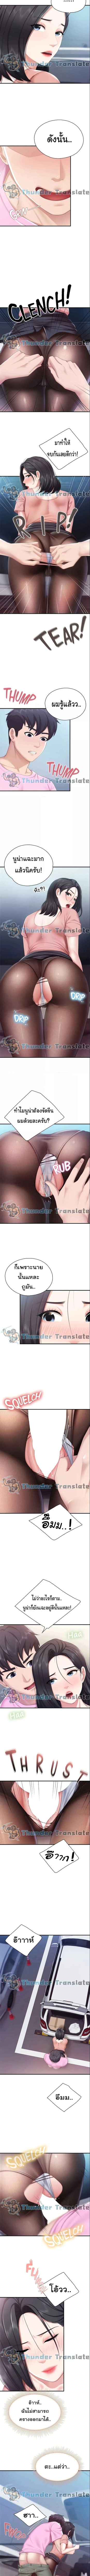 Welcome To Kids Cafe’ 22 ภาพ 3